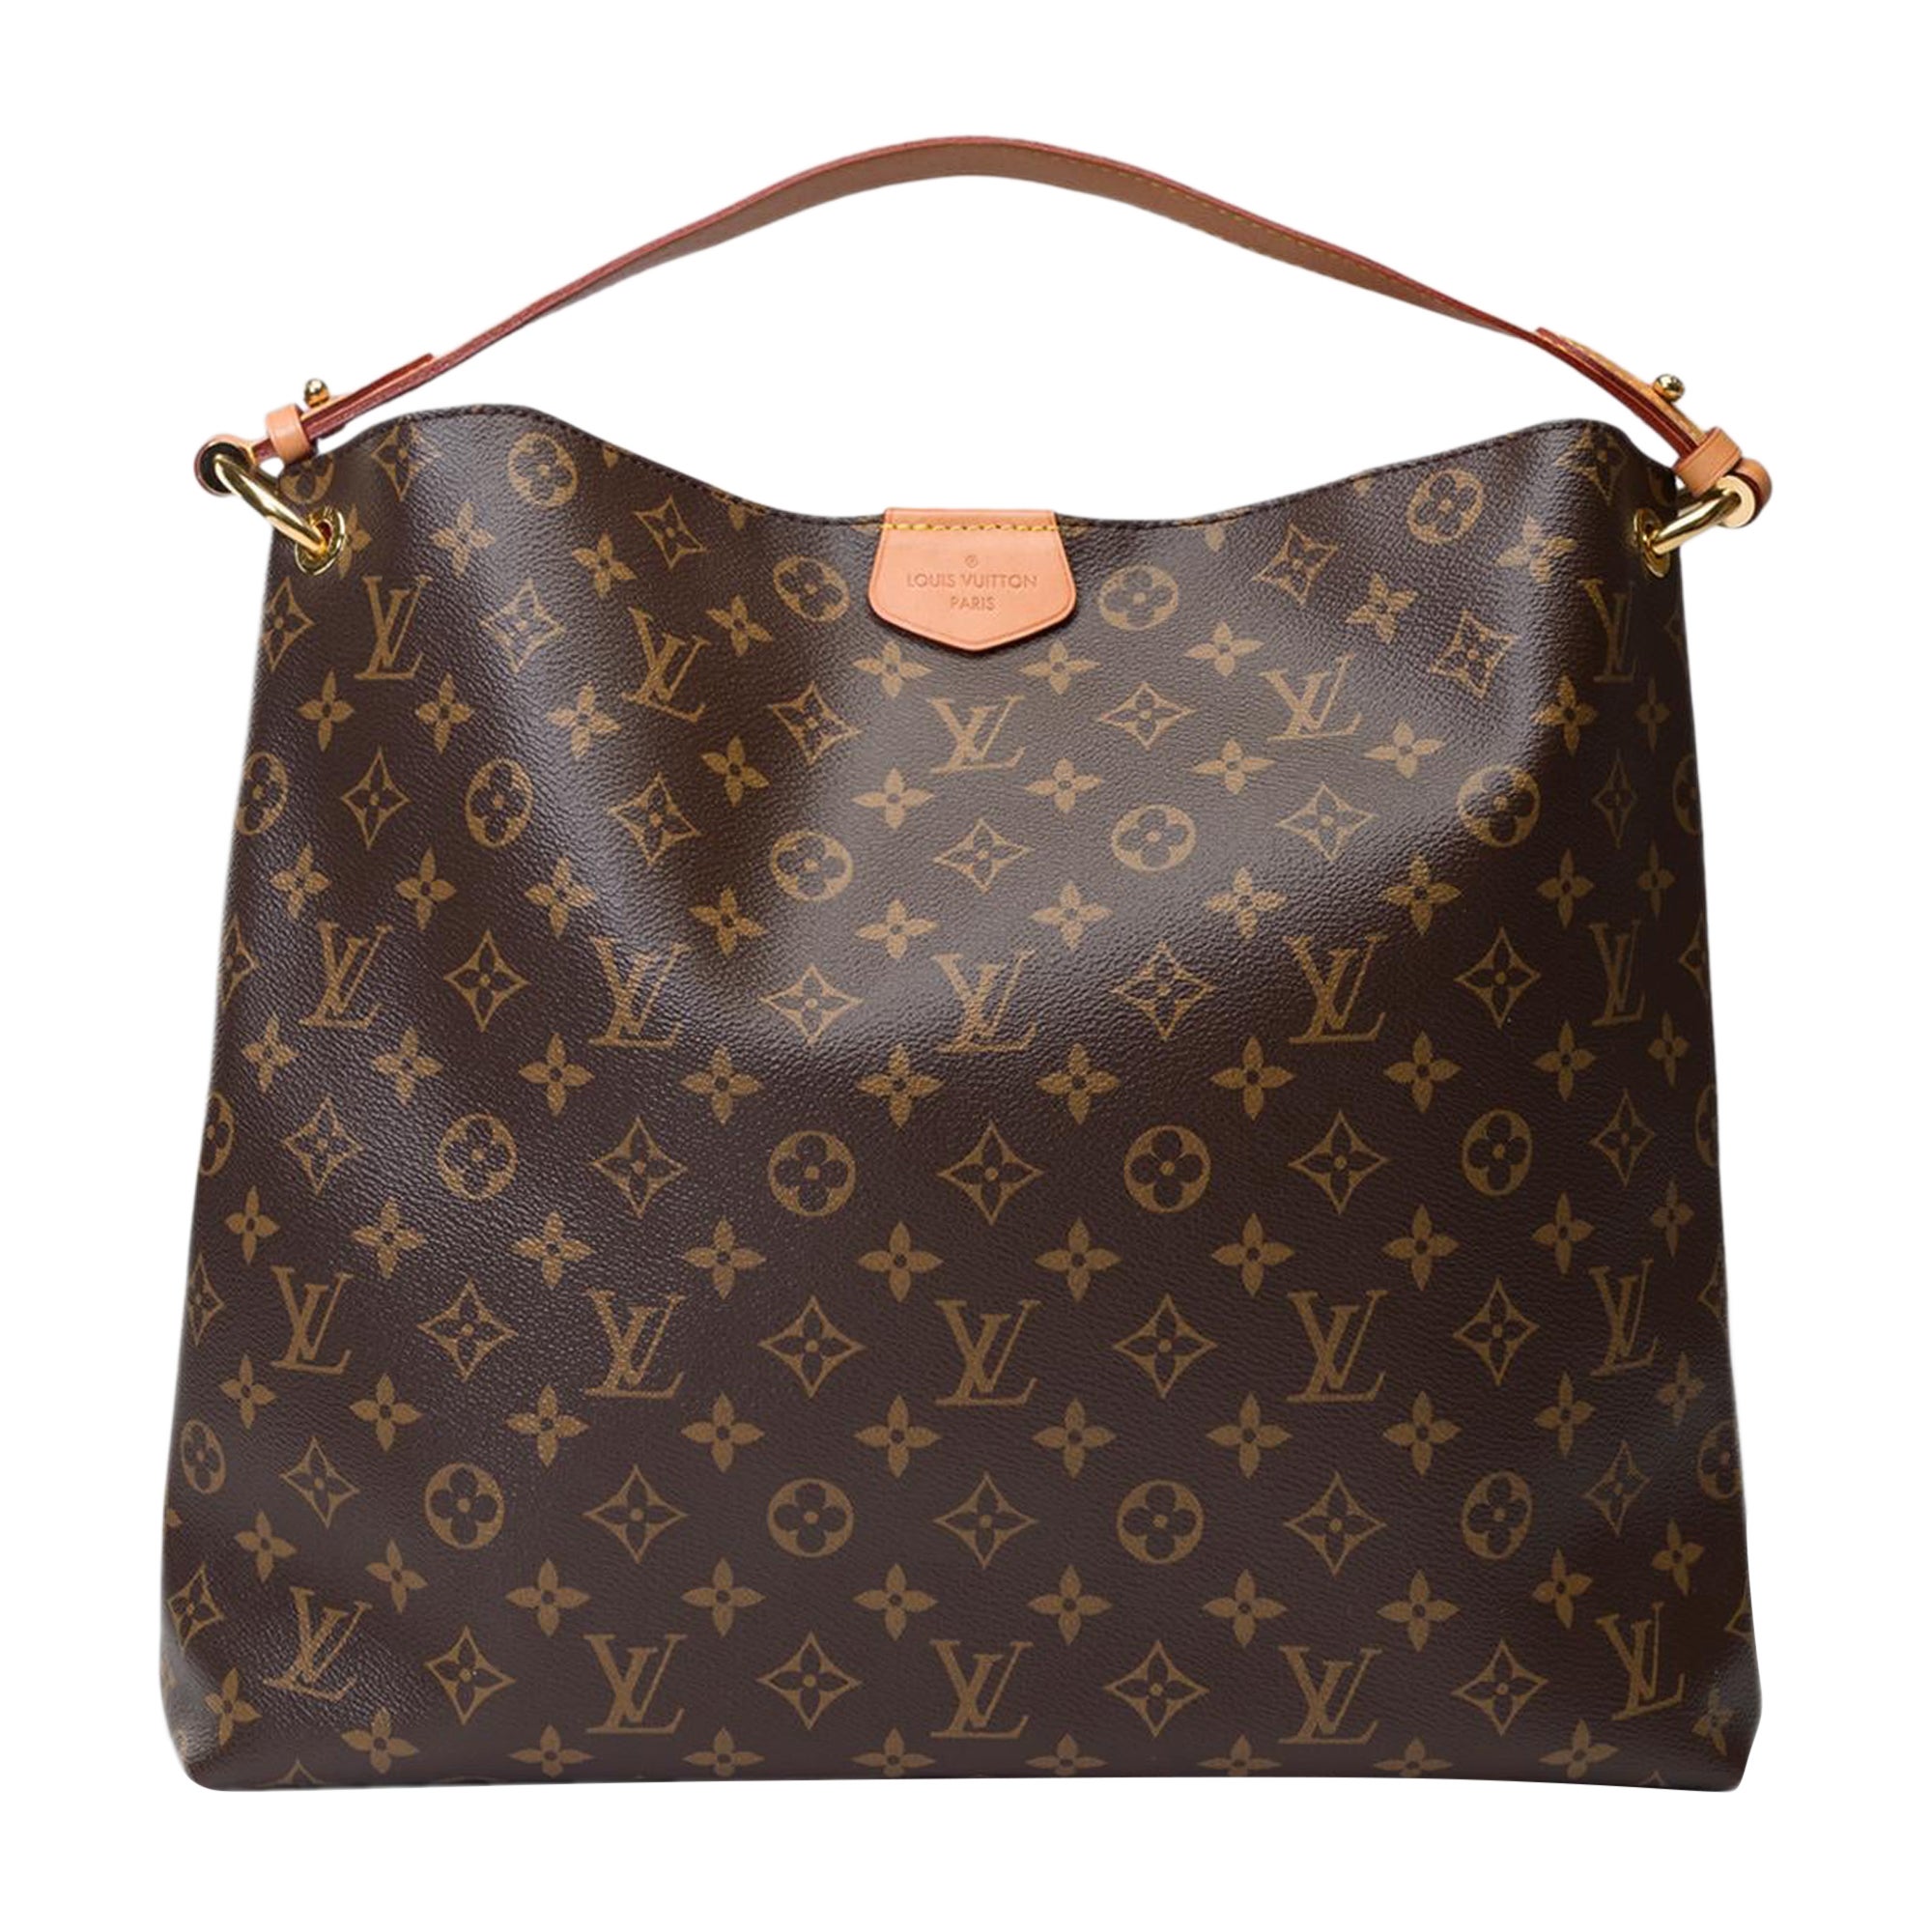 Louis Vuitton Graceful MM Tote bag in brown Monogram canvas, GHW For Sale